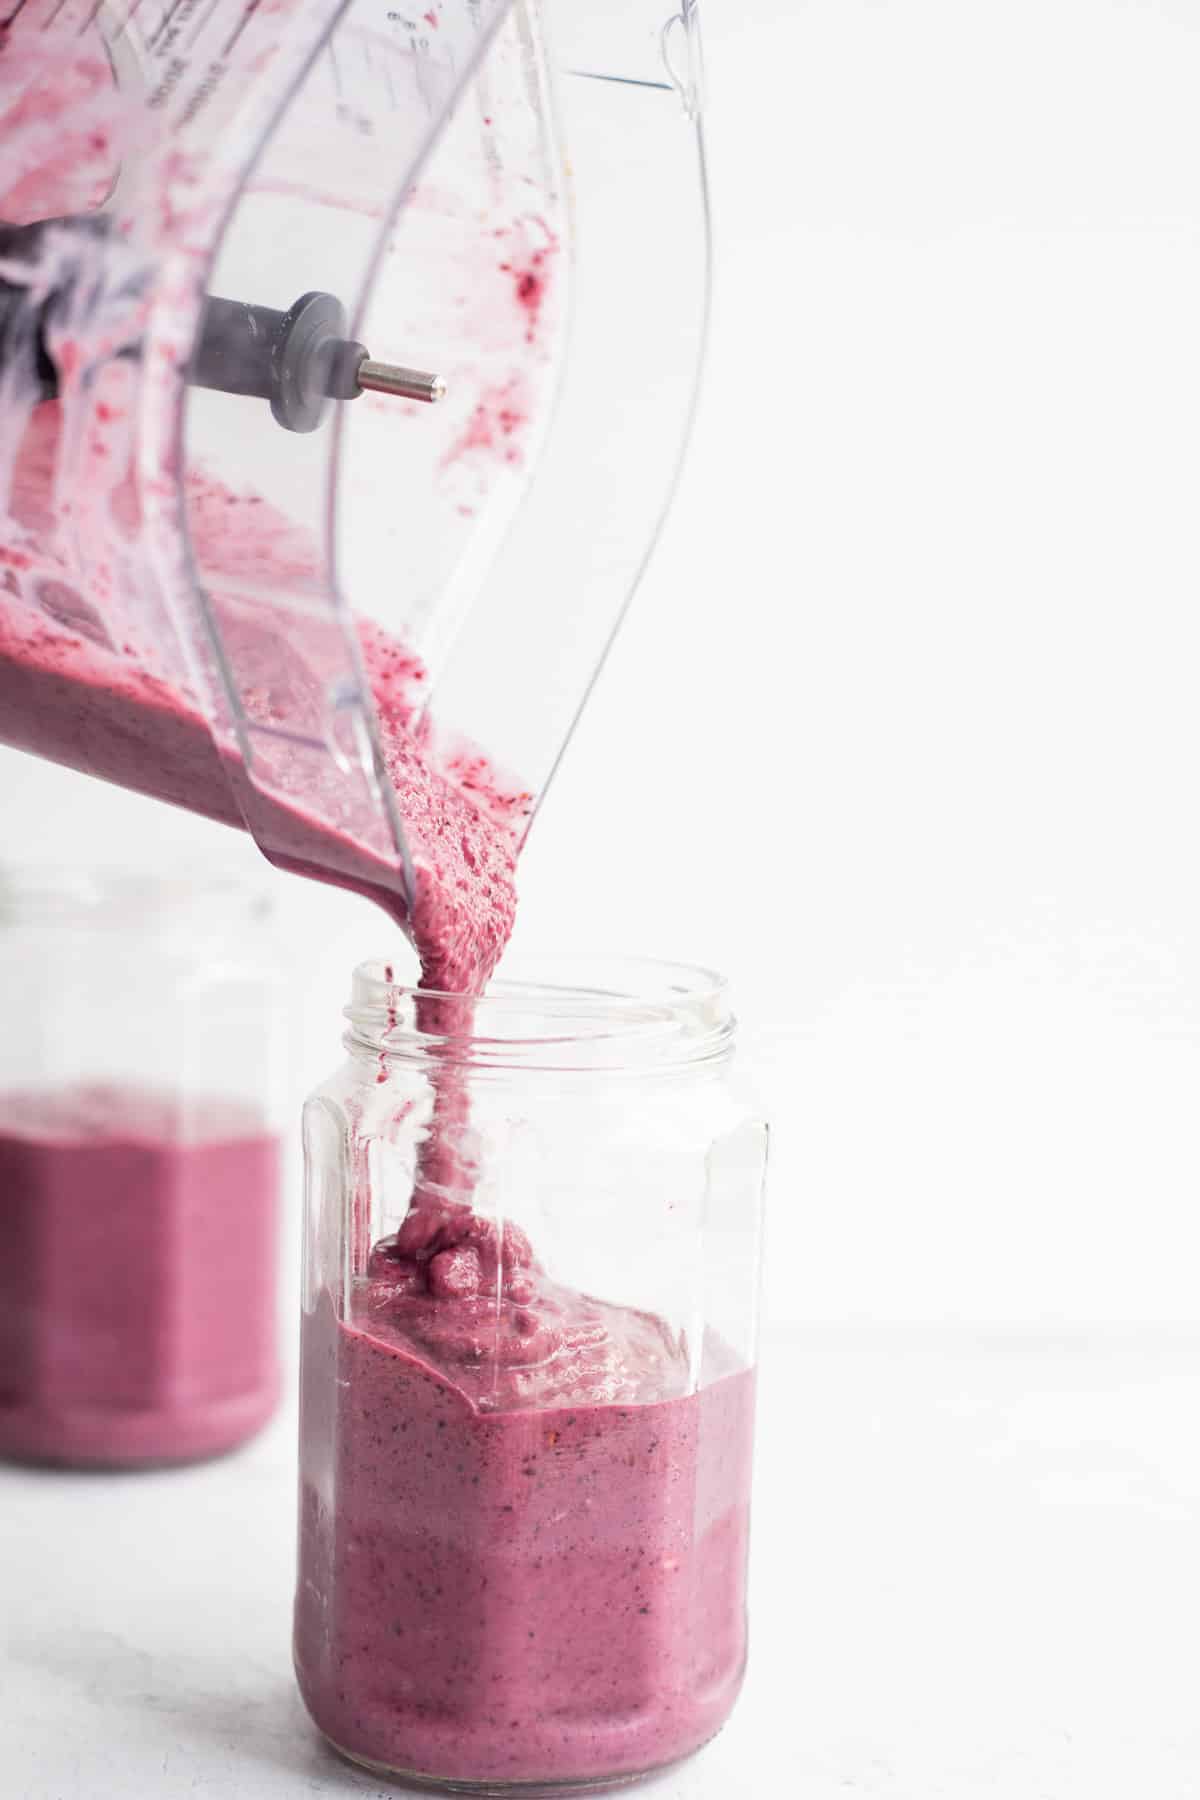 mixed berry smoothie pouring from a blender into a glass jar.